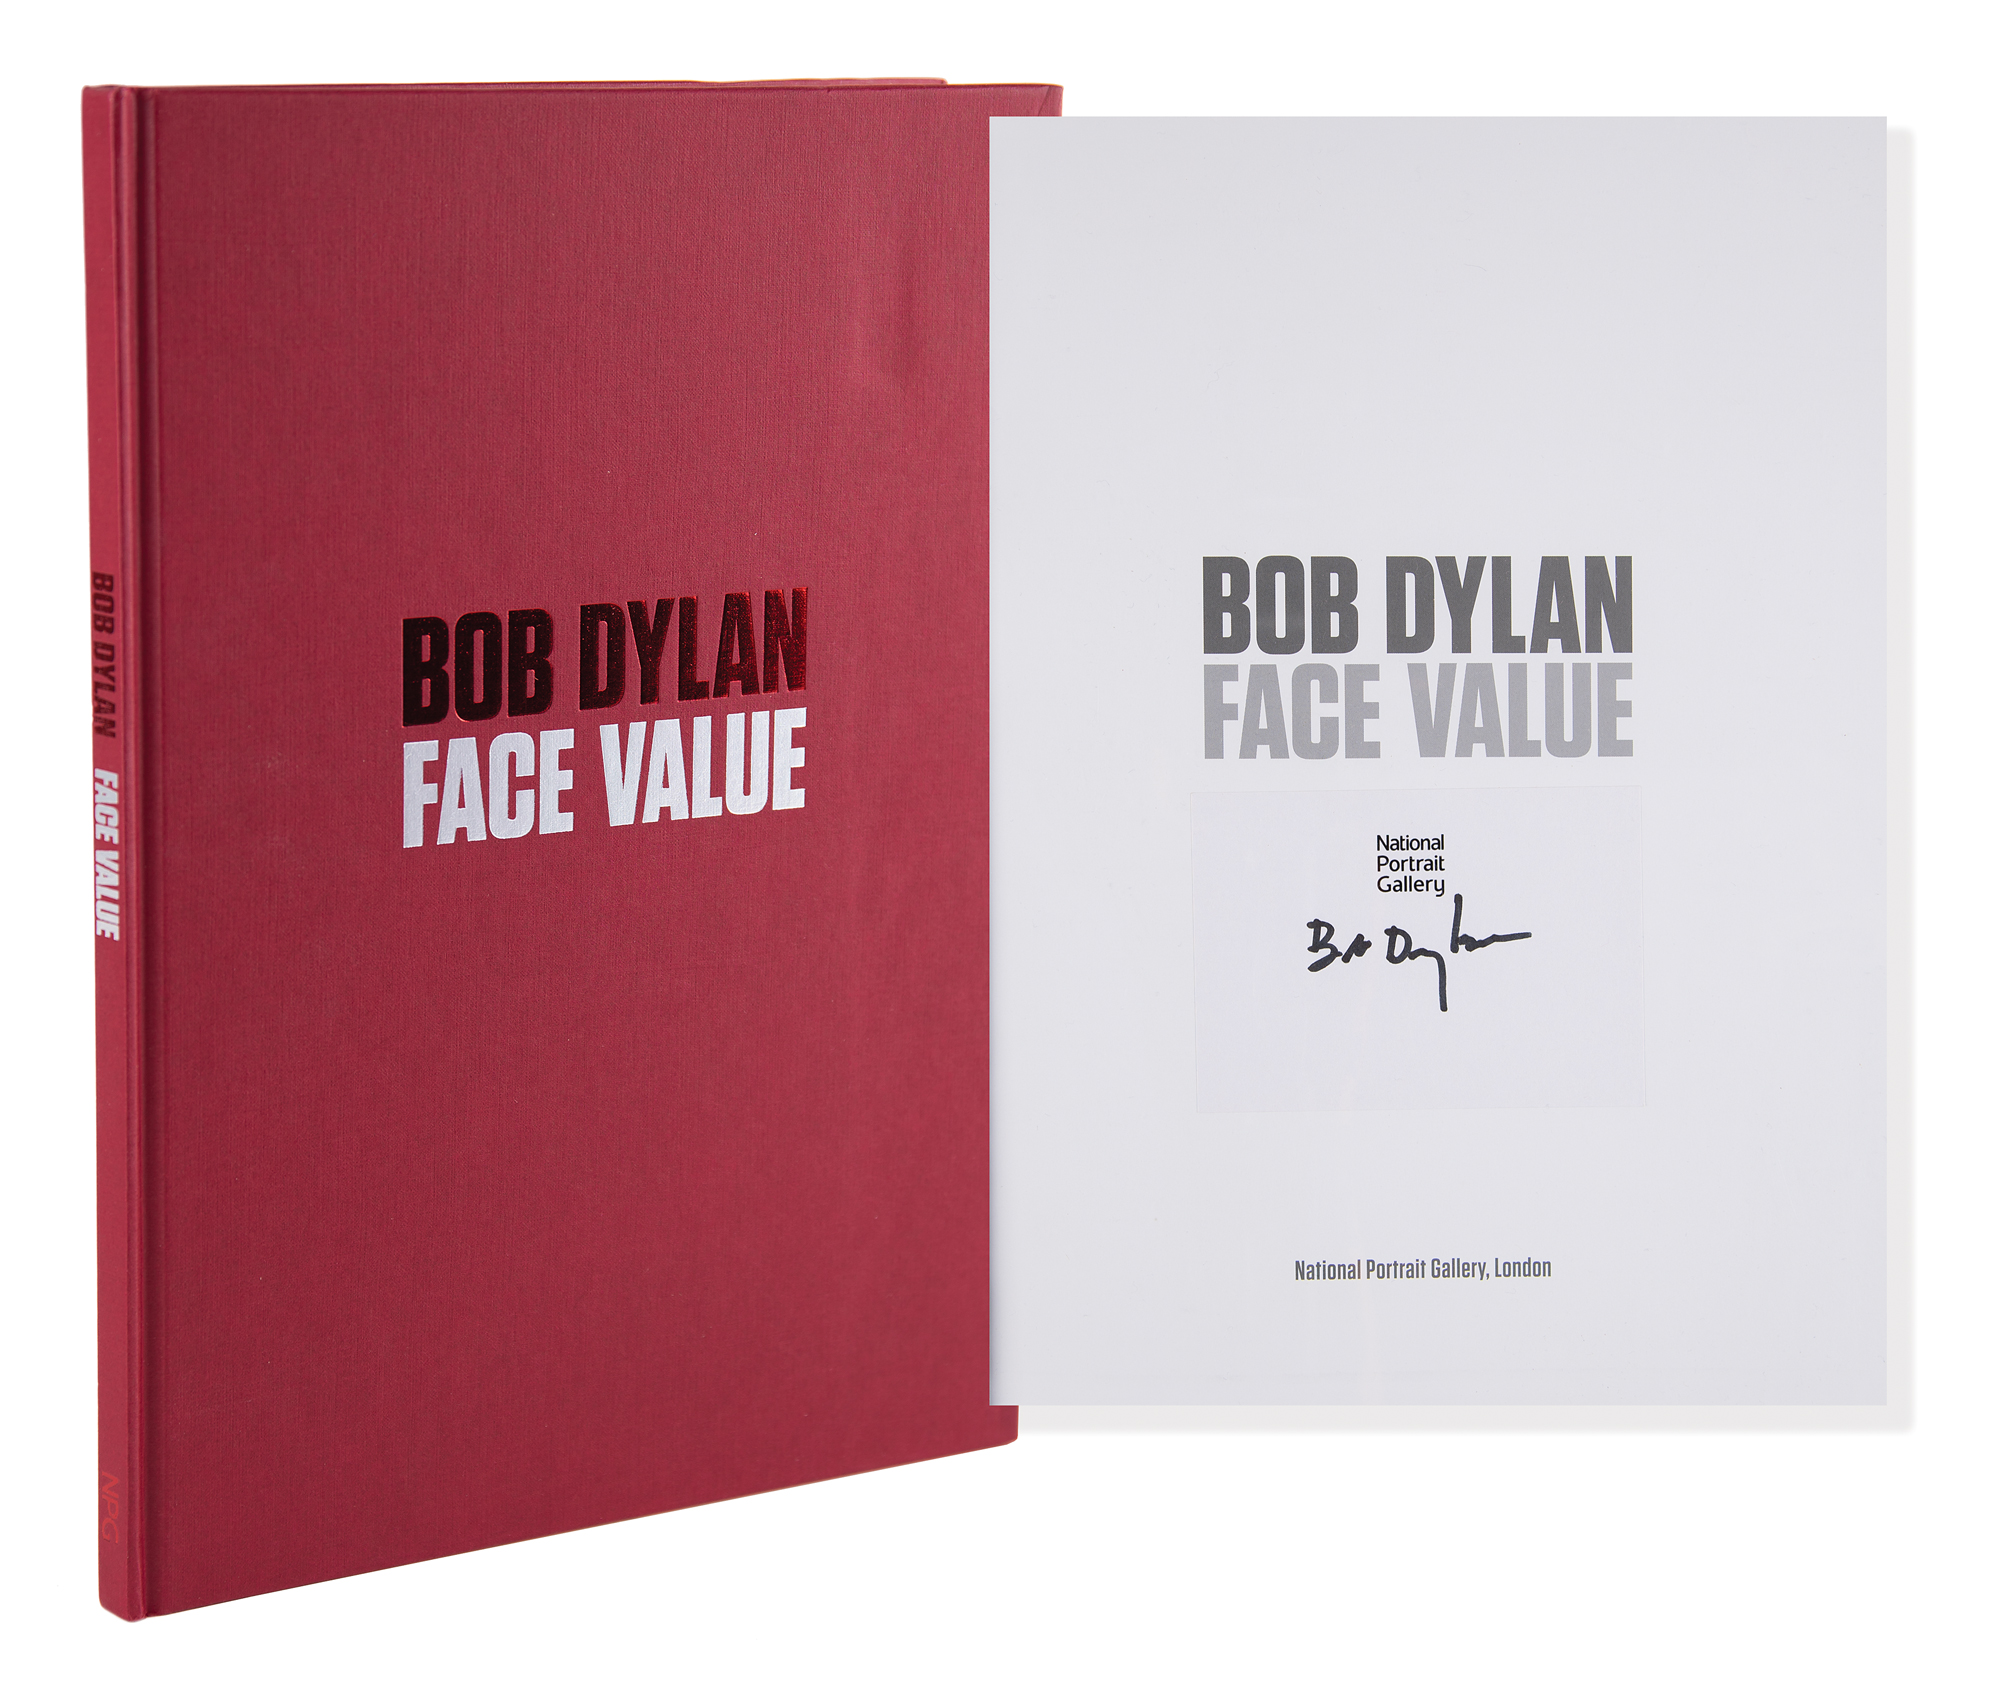 Bob Dylan Signed Limited Edition 'Face Value' Book - Released